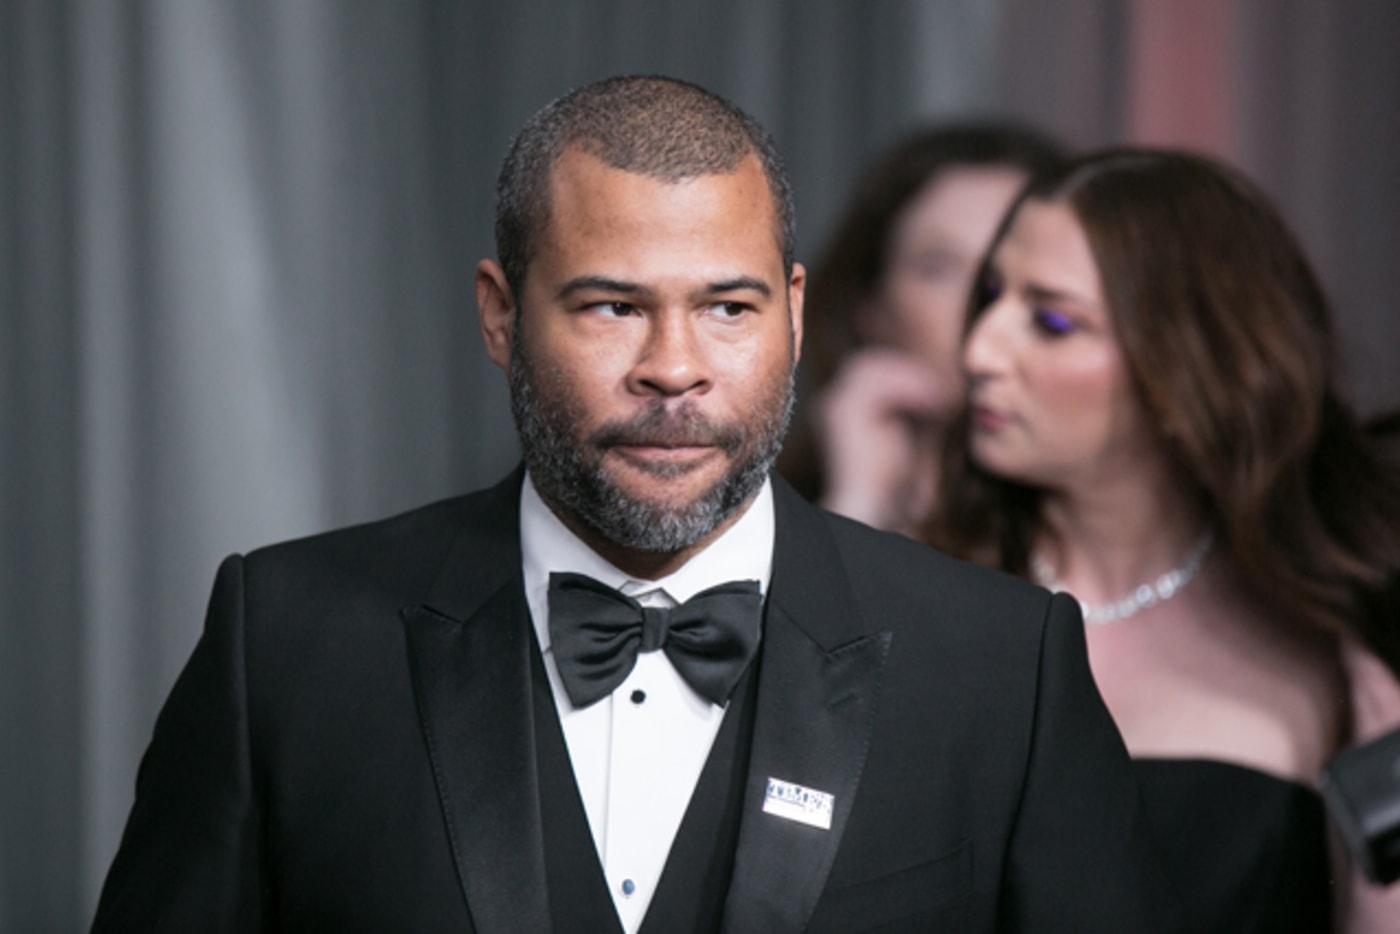 Jordan Peele attends the Focus Features Golden Globe Awards After Party